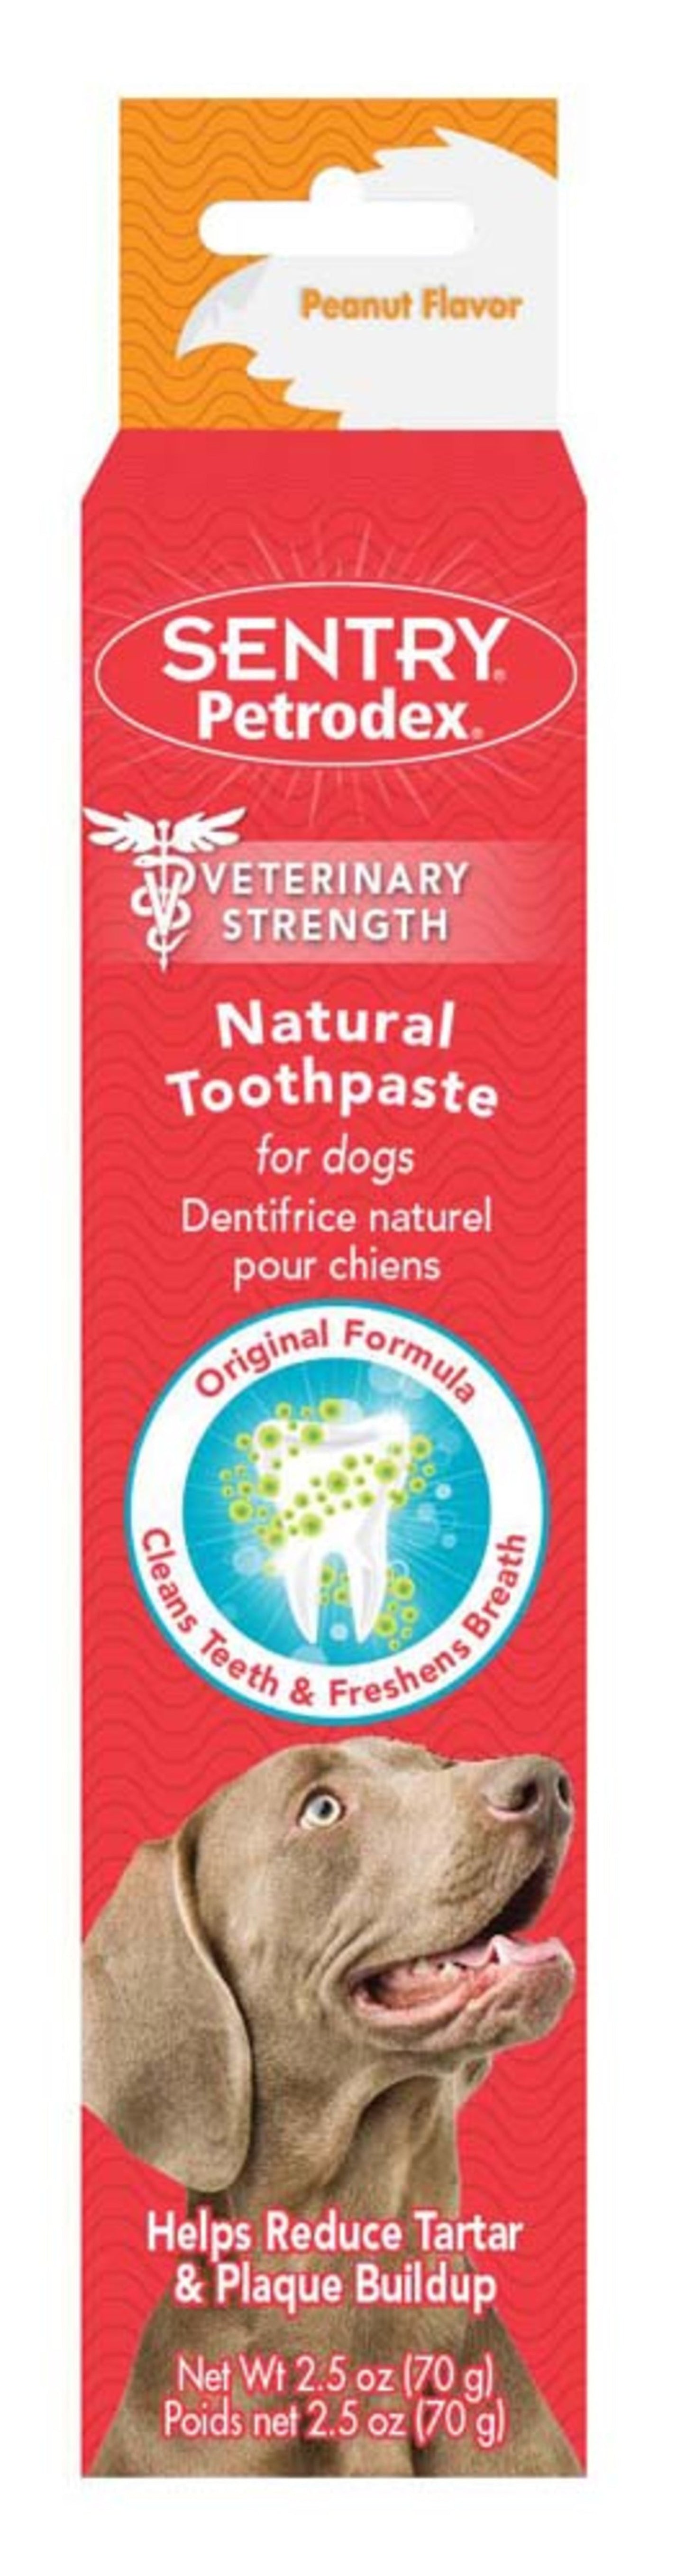 SENTRY Petrodex Natural Toothpaste for Dogs 1ea/2.5 oz